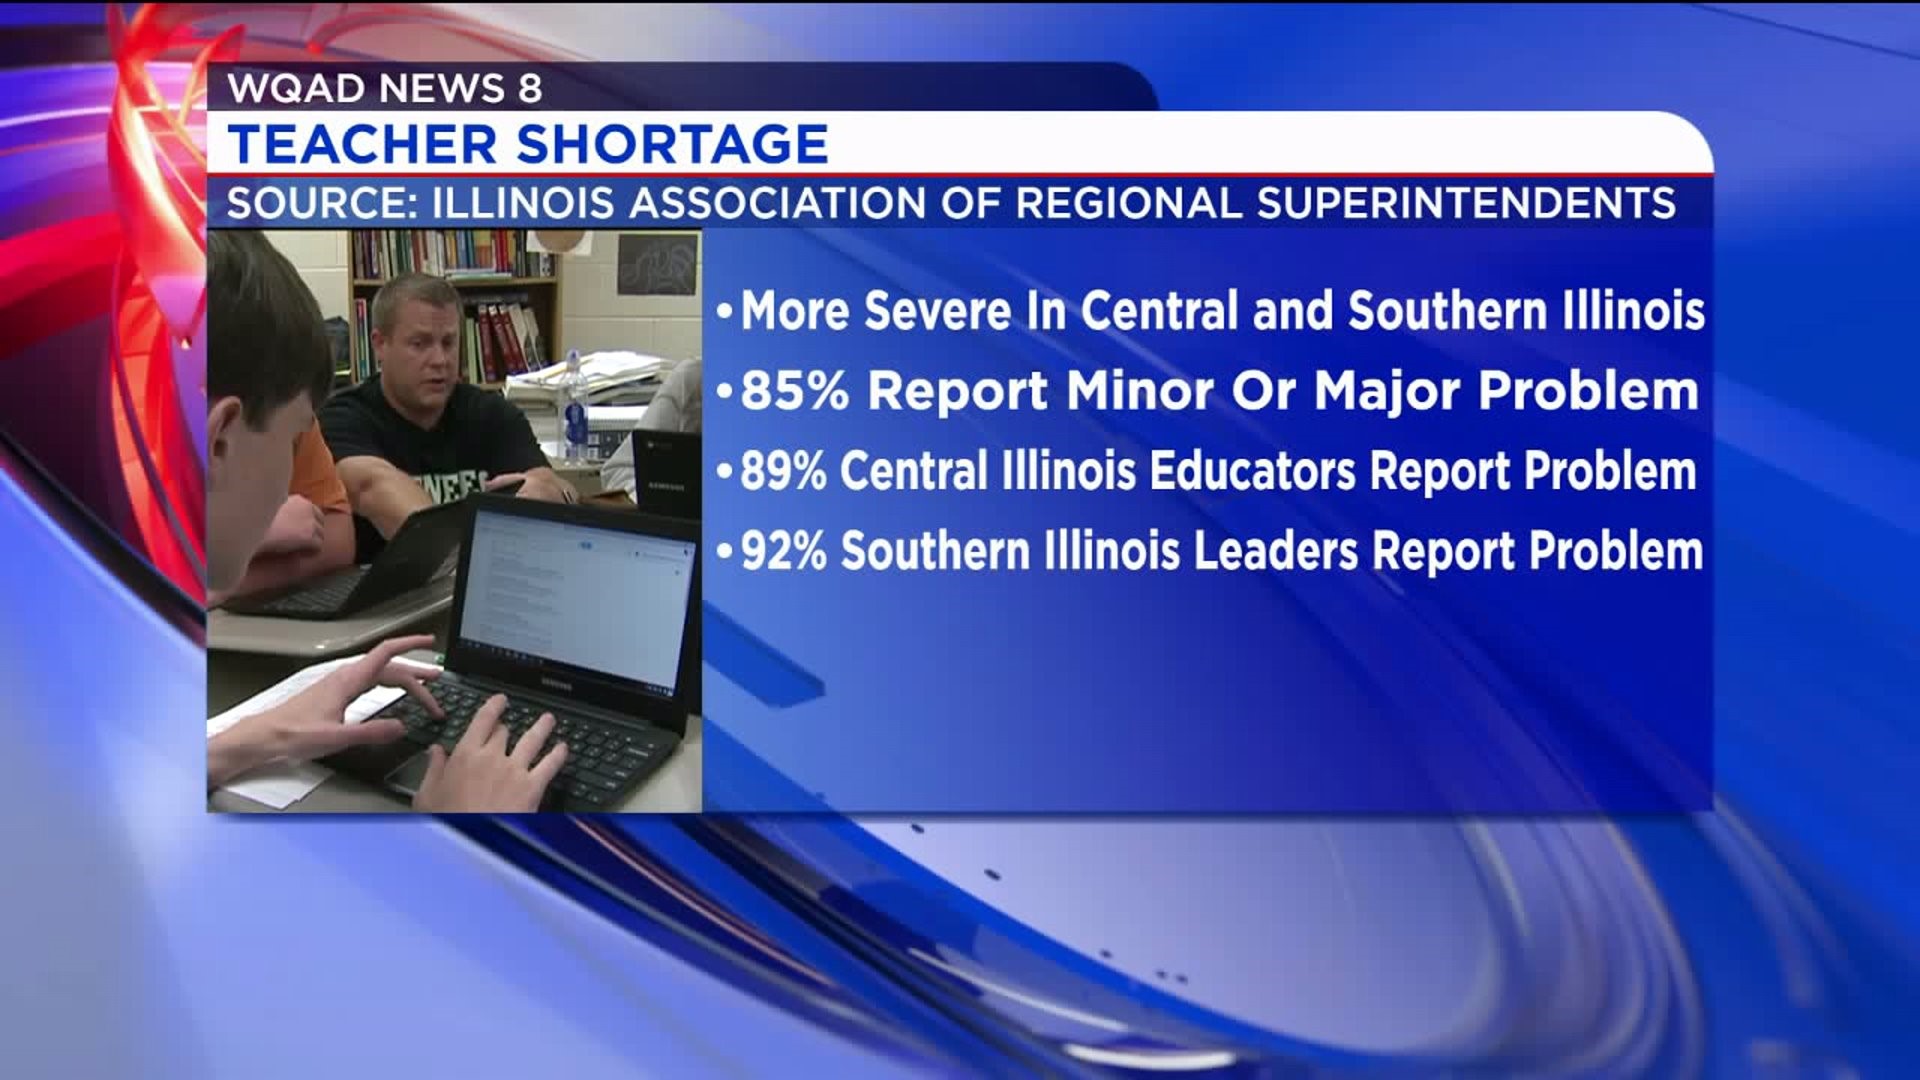 Study shows shortage of teachers in central and southern Illinois